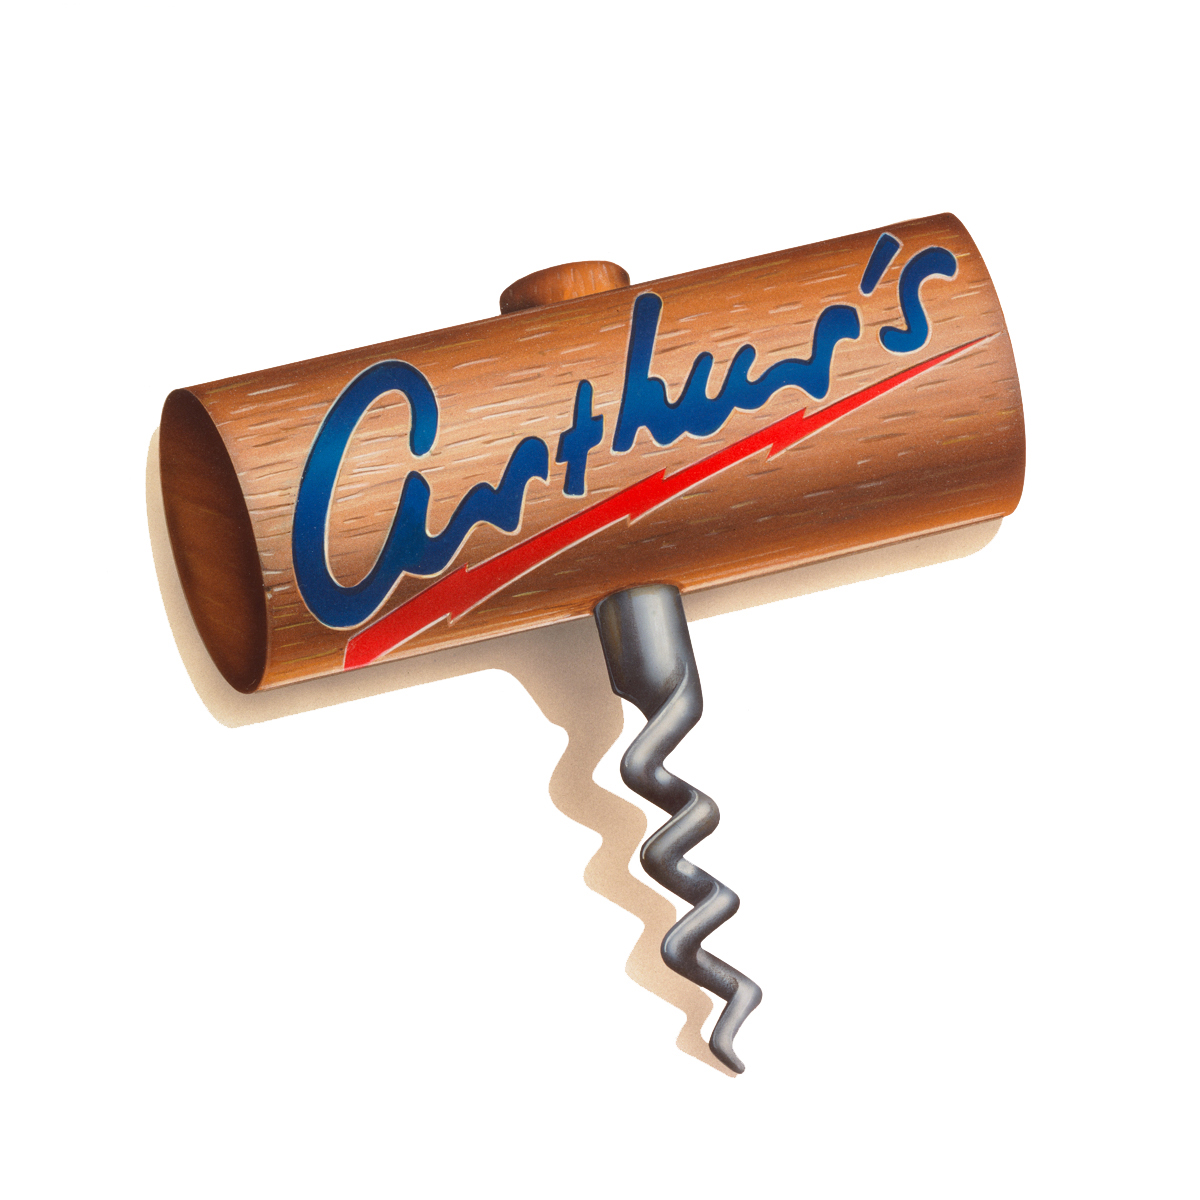  Arthur’s Corkscrew logo  Branding creative and design by Chuck Mitchell  Illustration by Curt Hall 